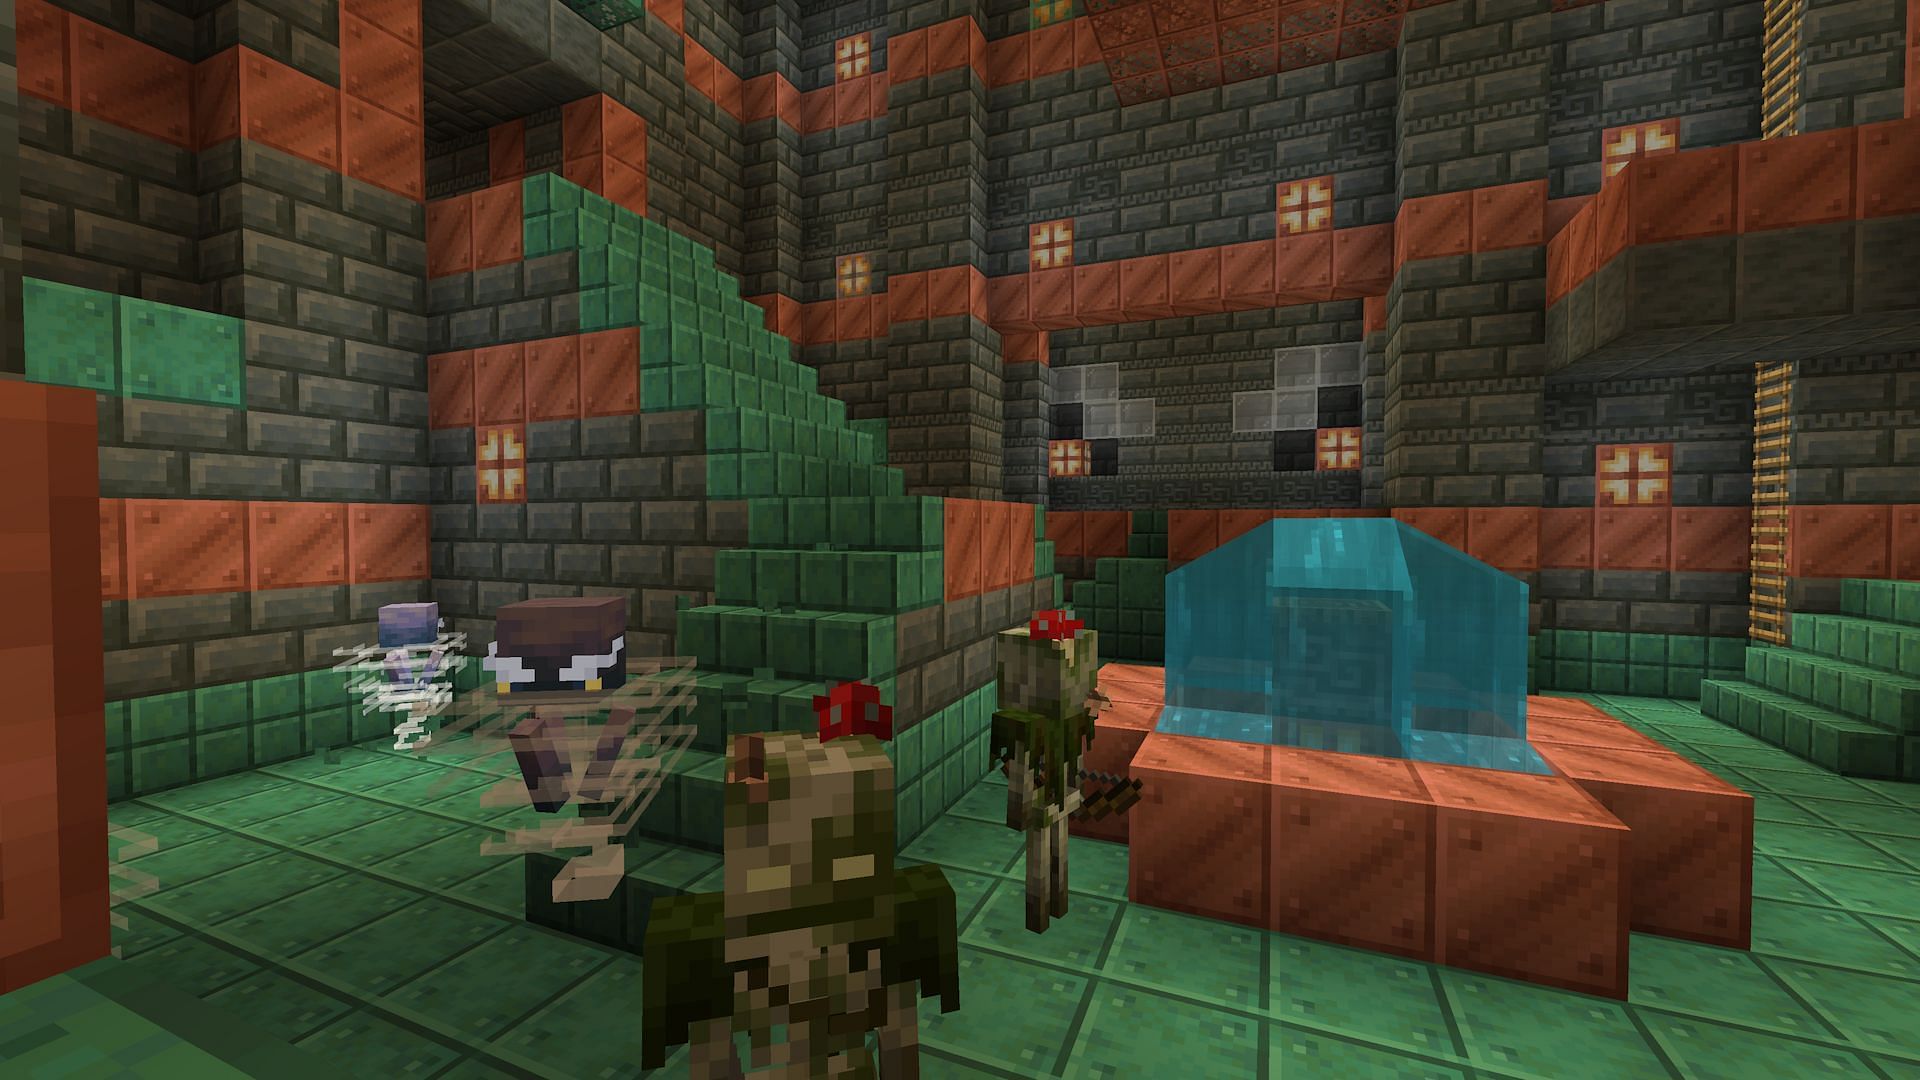 Trial chambers would be even more dangerous with a unique mini boss mob (Image via Mojang)